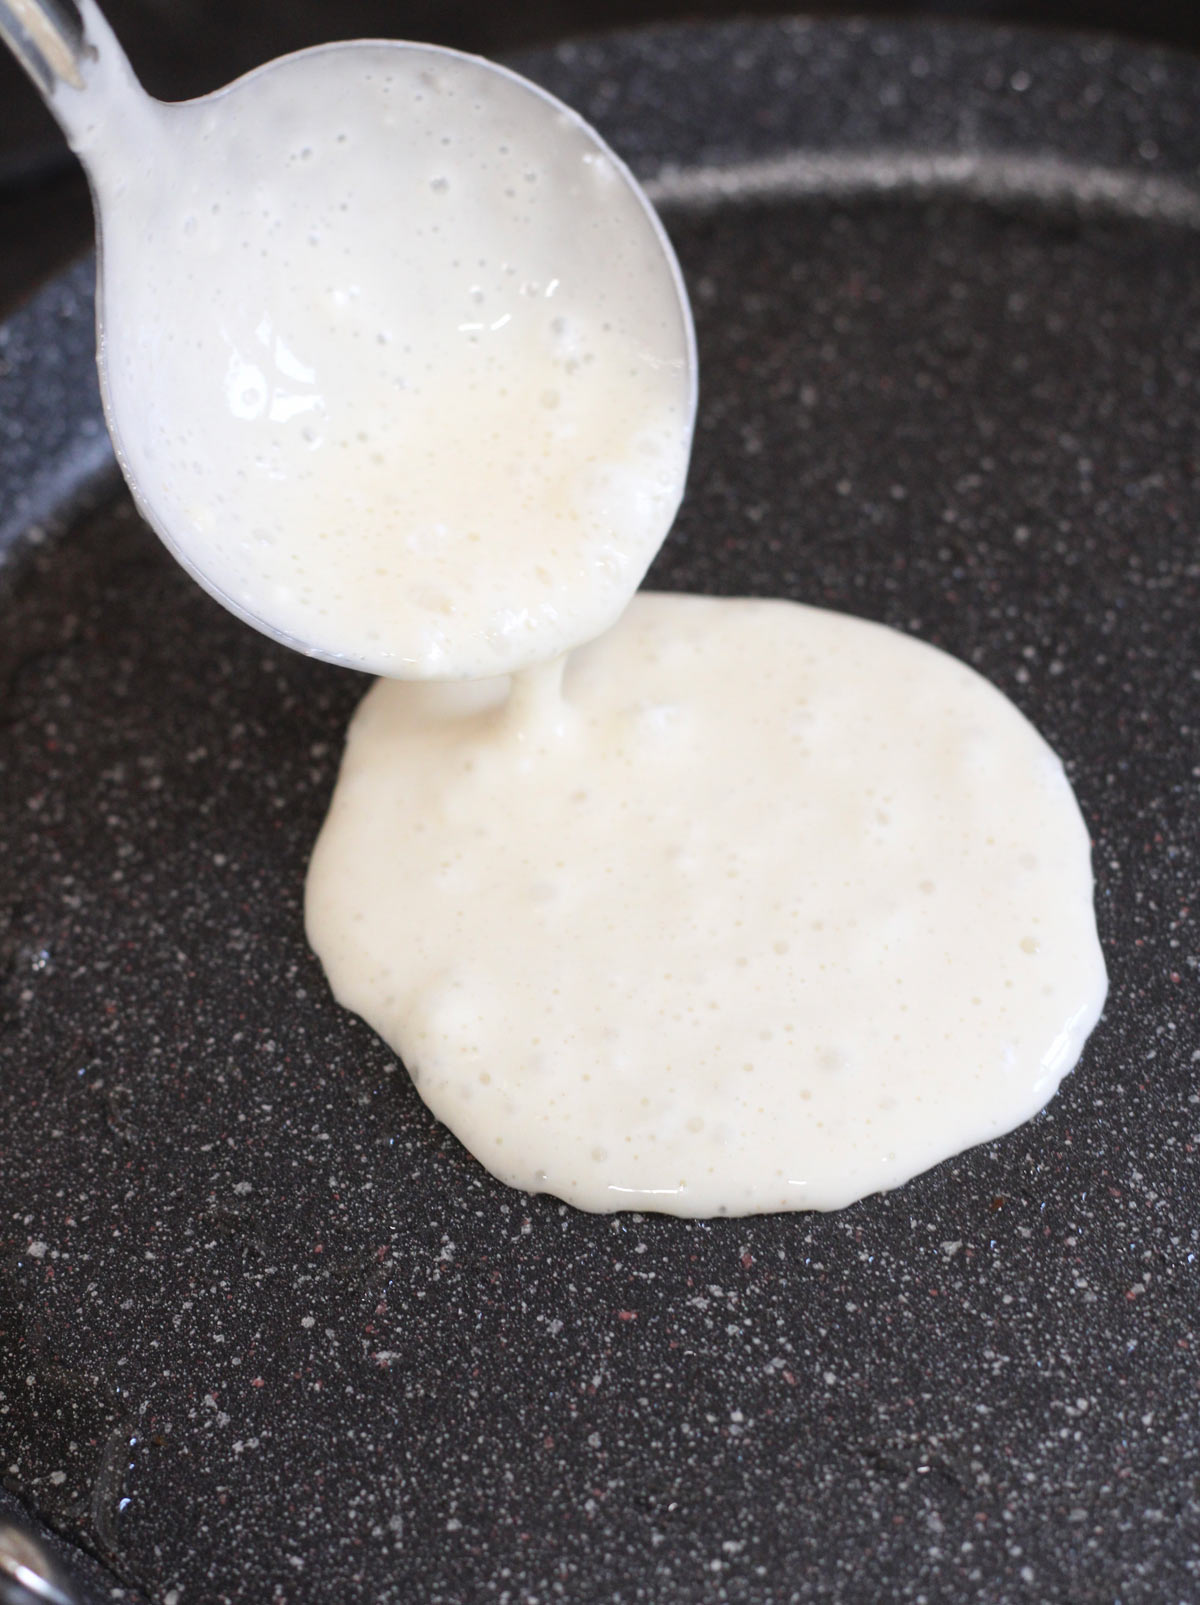 Pouring pancake batter onto a hot griddle.